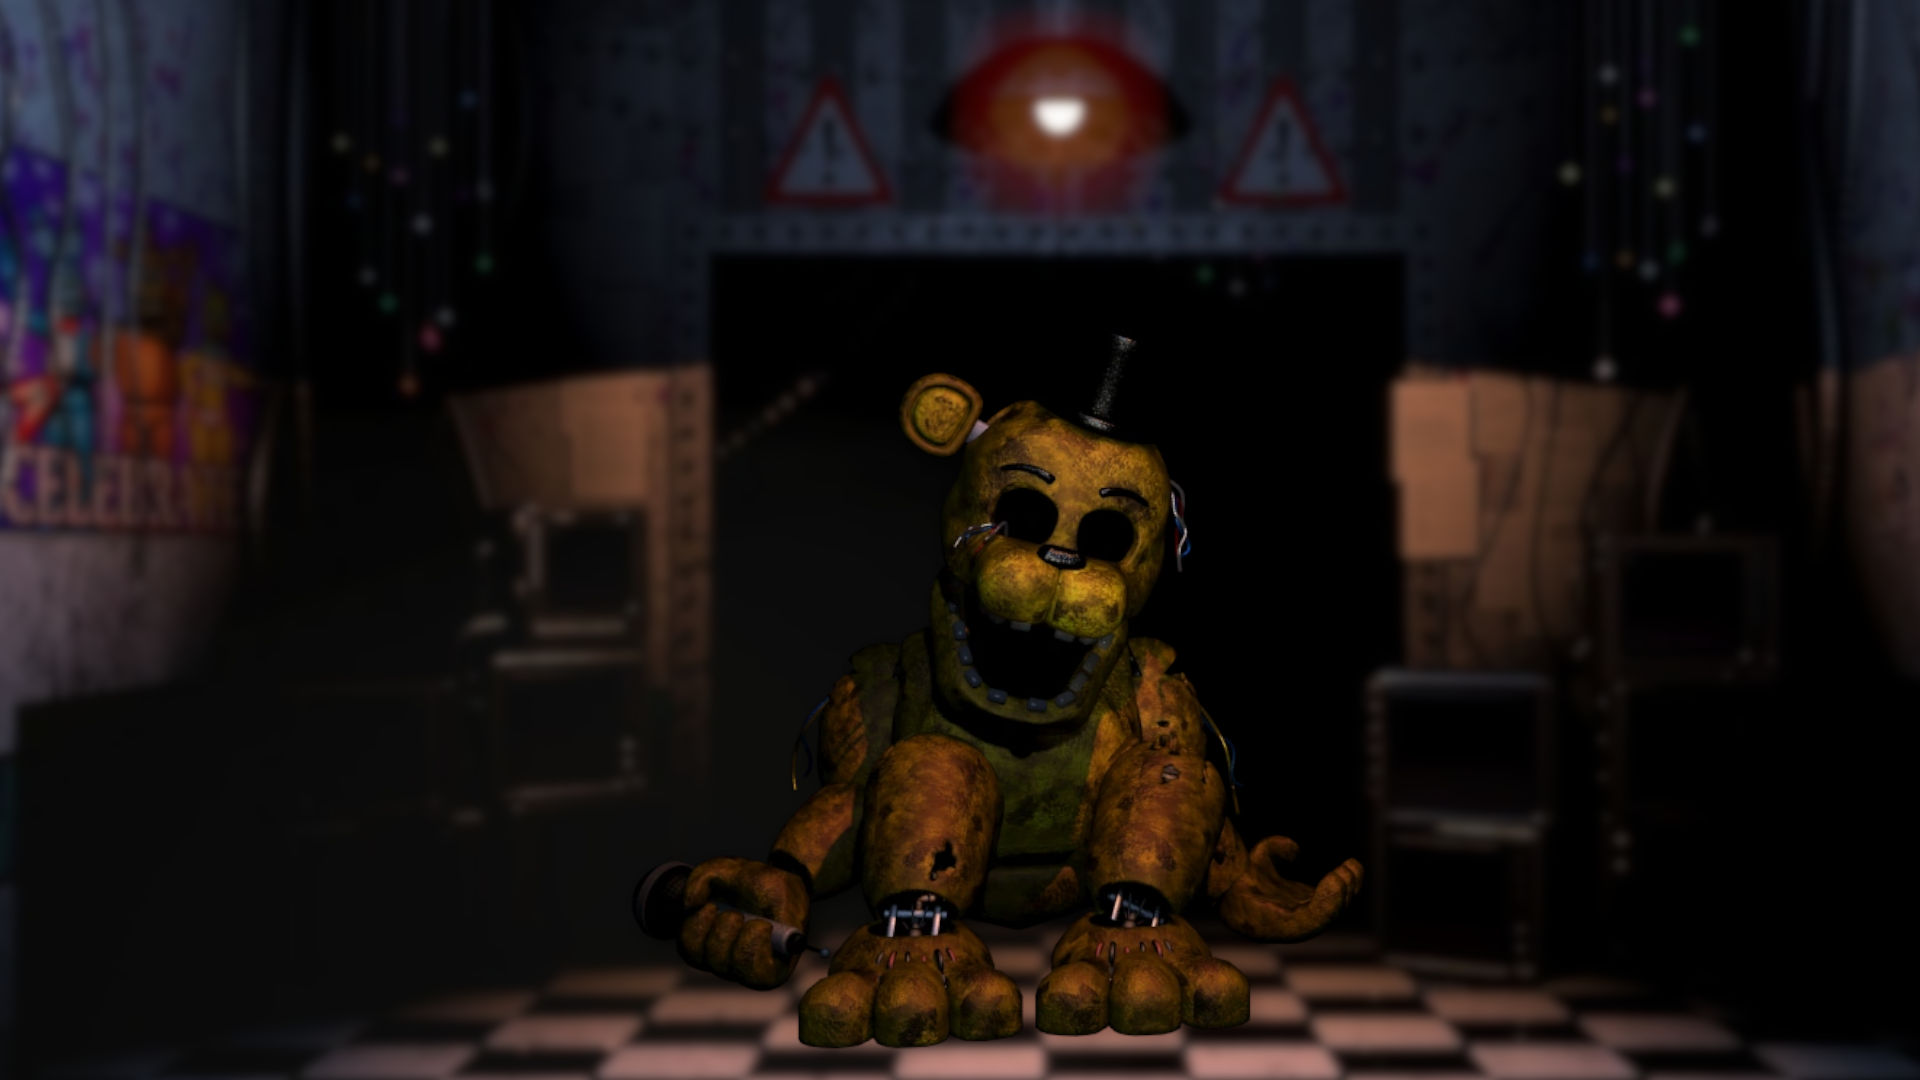 Glamrock Bonnie iconic Withered FNAF 2 form!